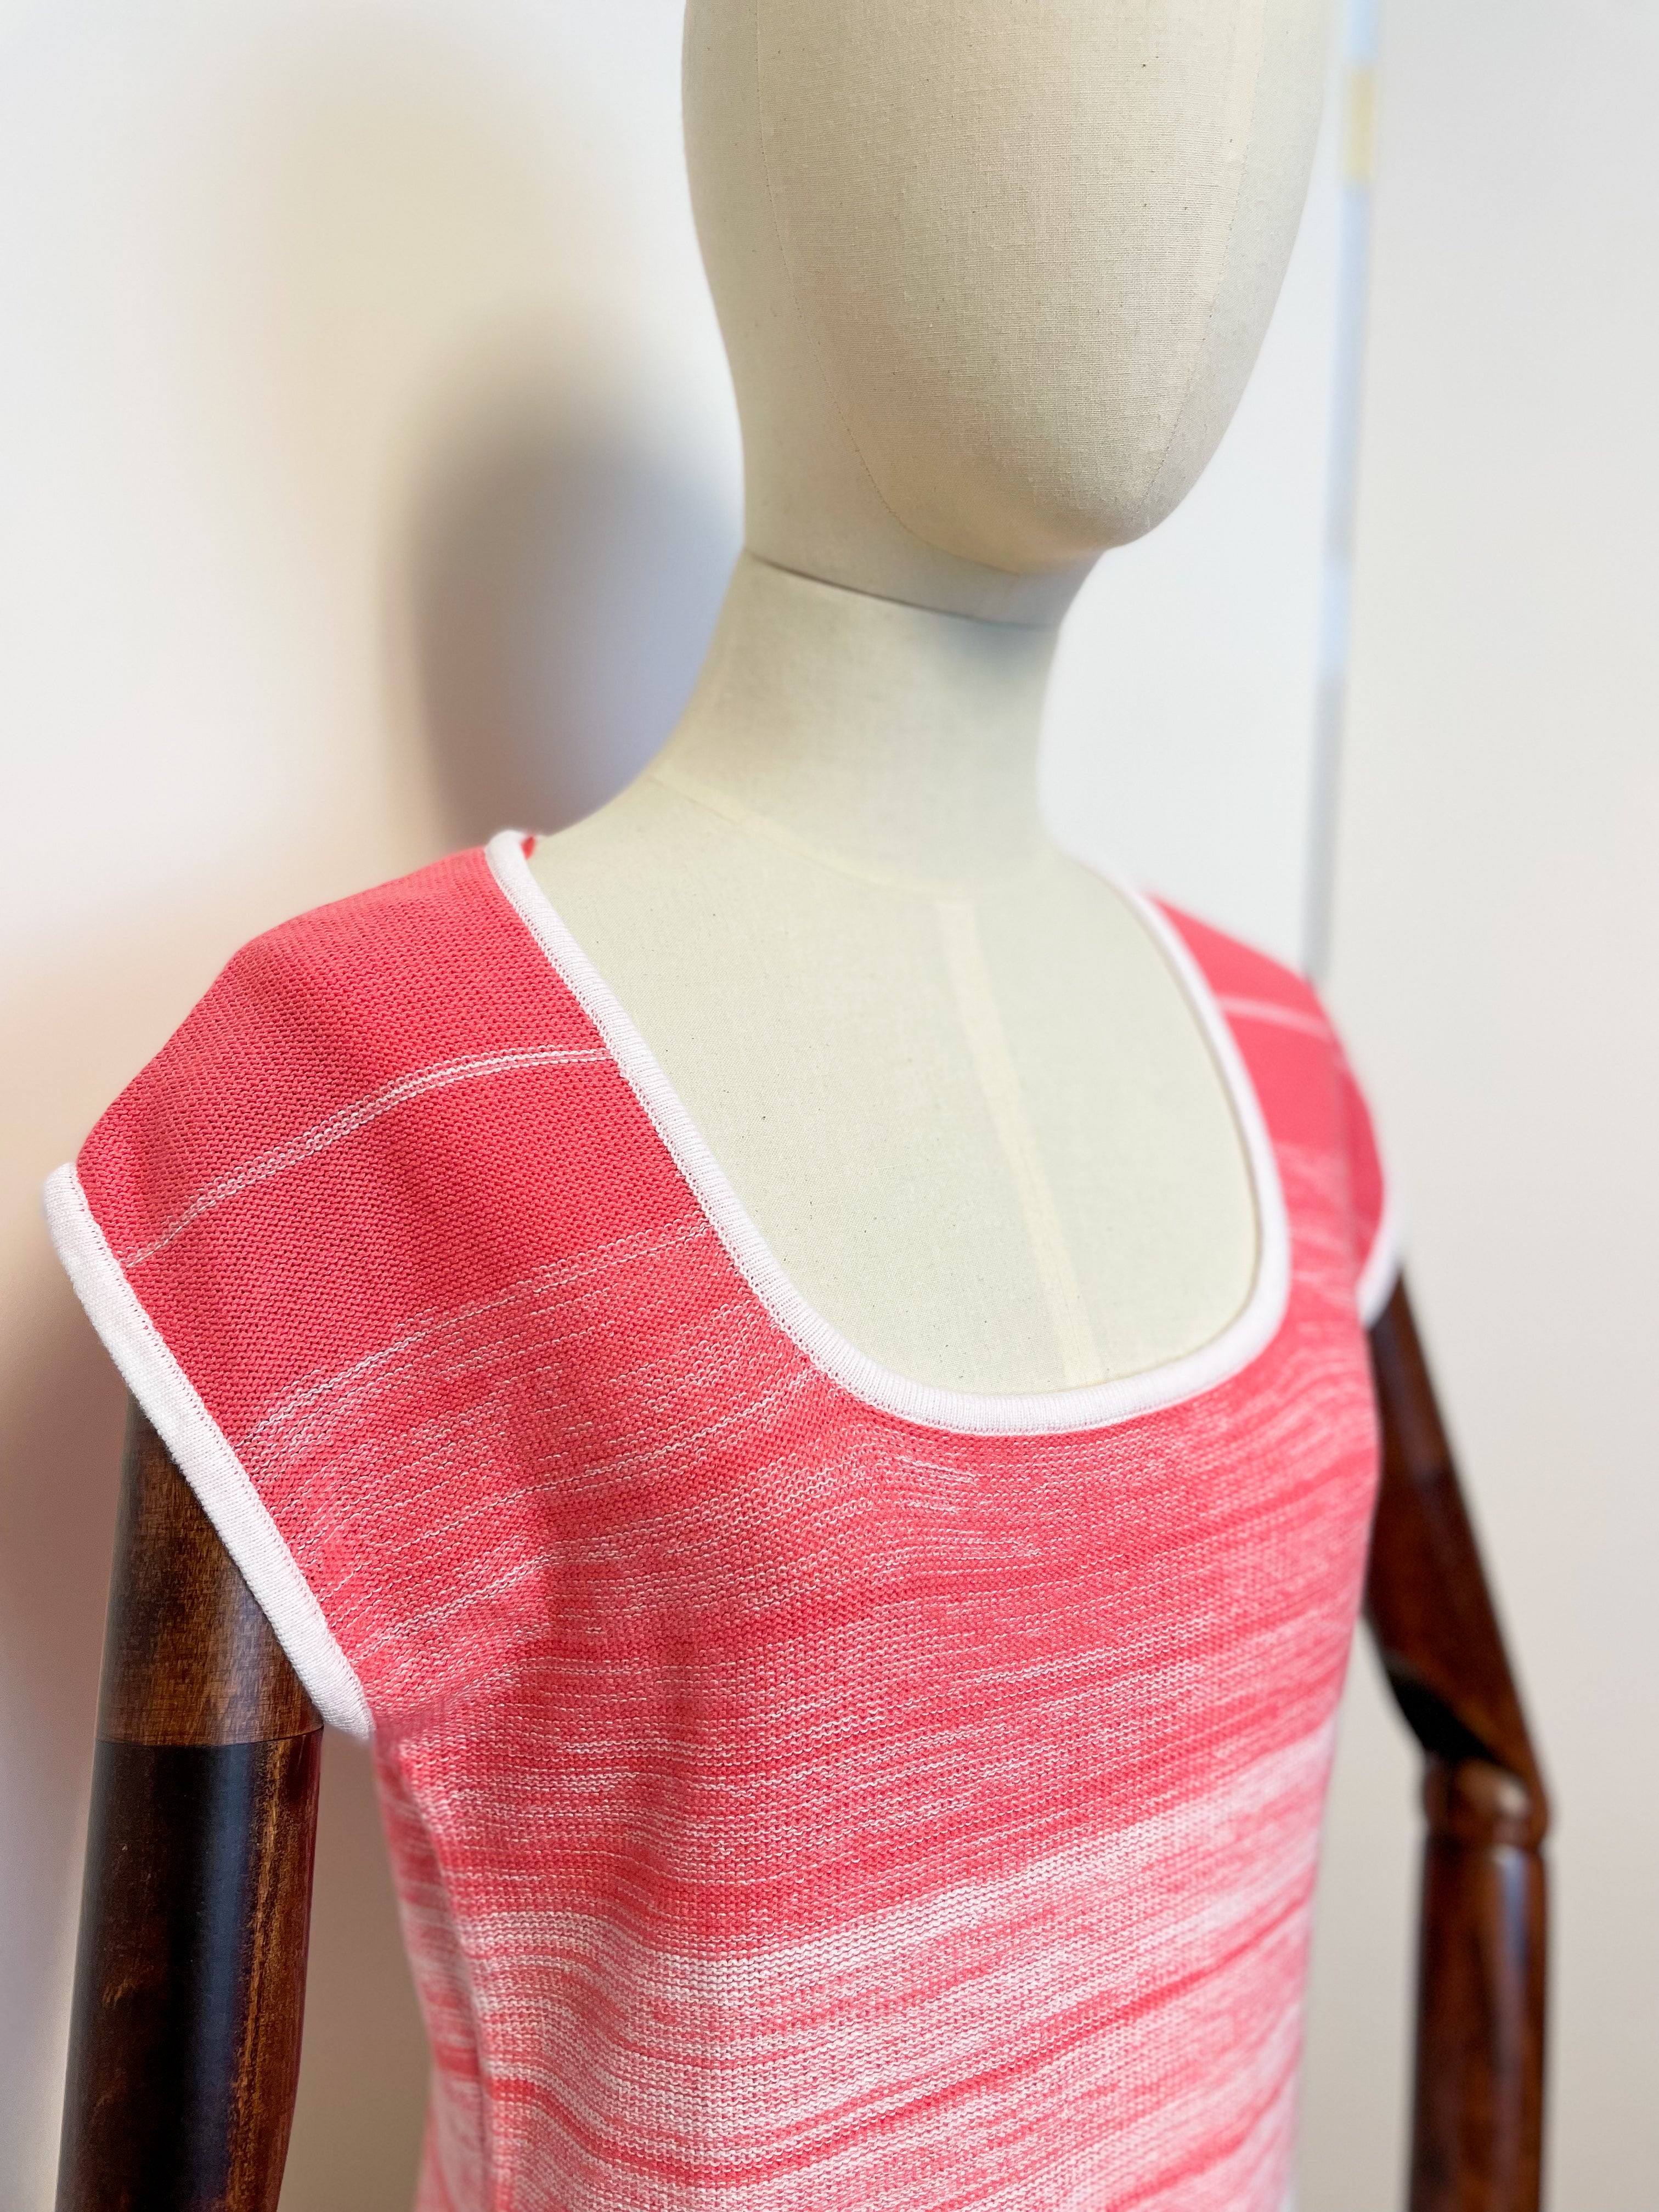 Pink Knitted Sleeveless Top